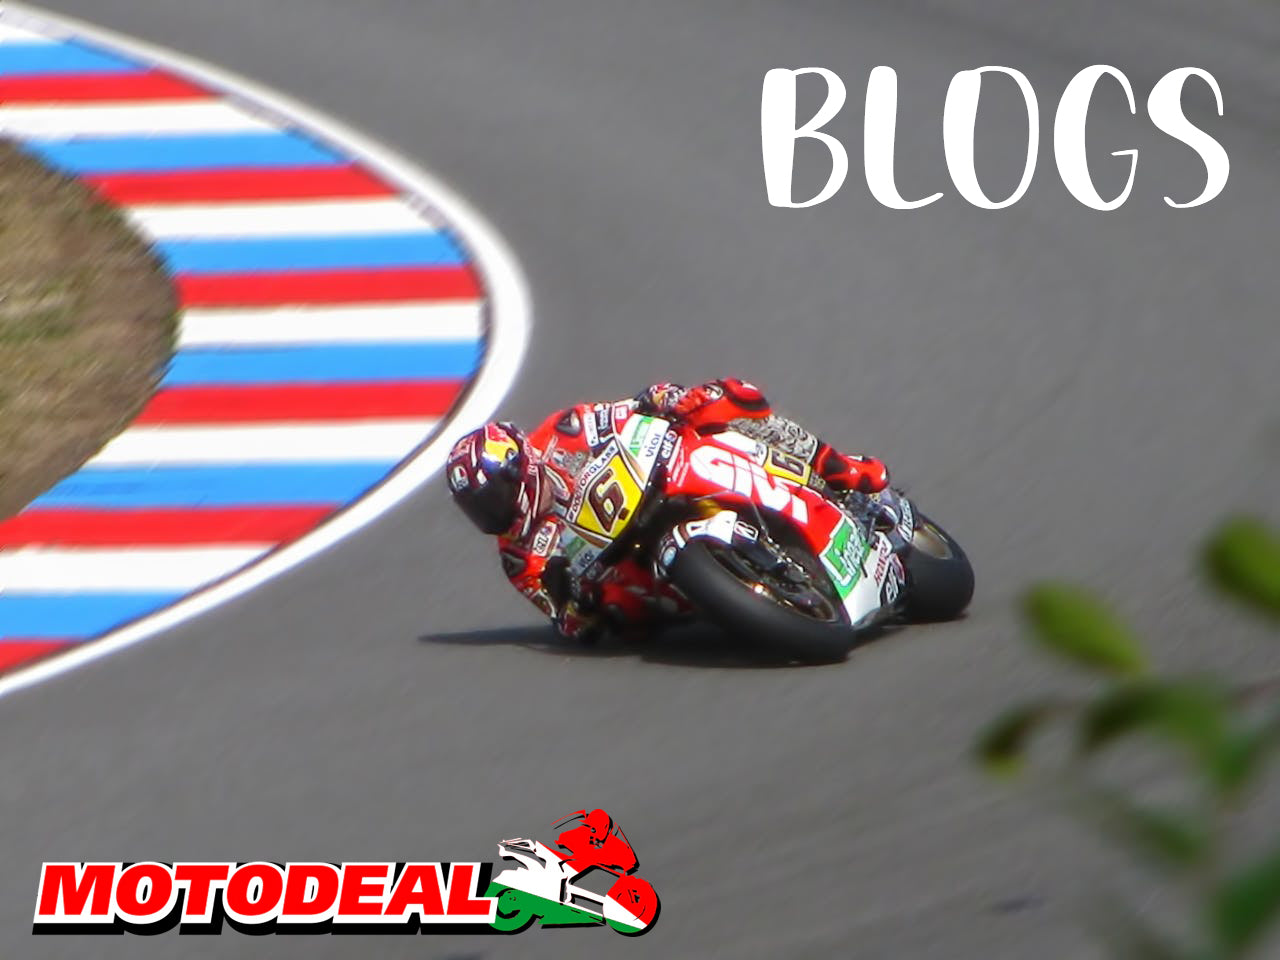 Explore MotoDeal Blogs and read exciting motonews, stories, reviews and articles about brands, bikes, parts and accessories